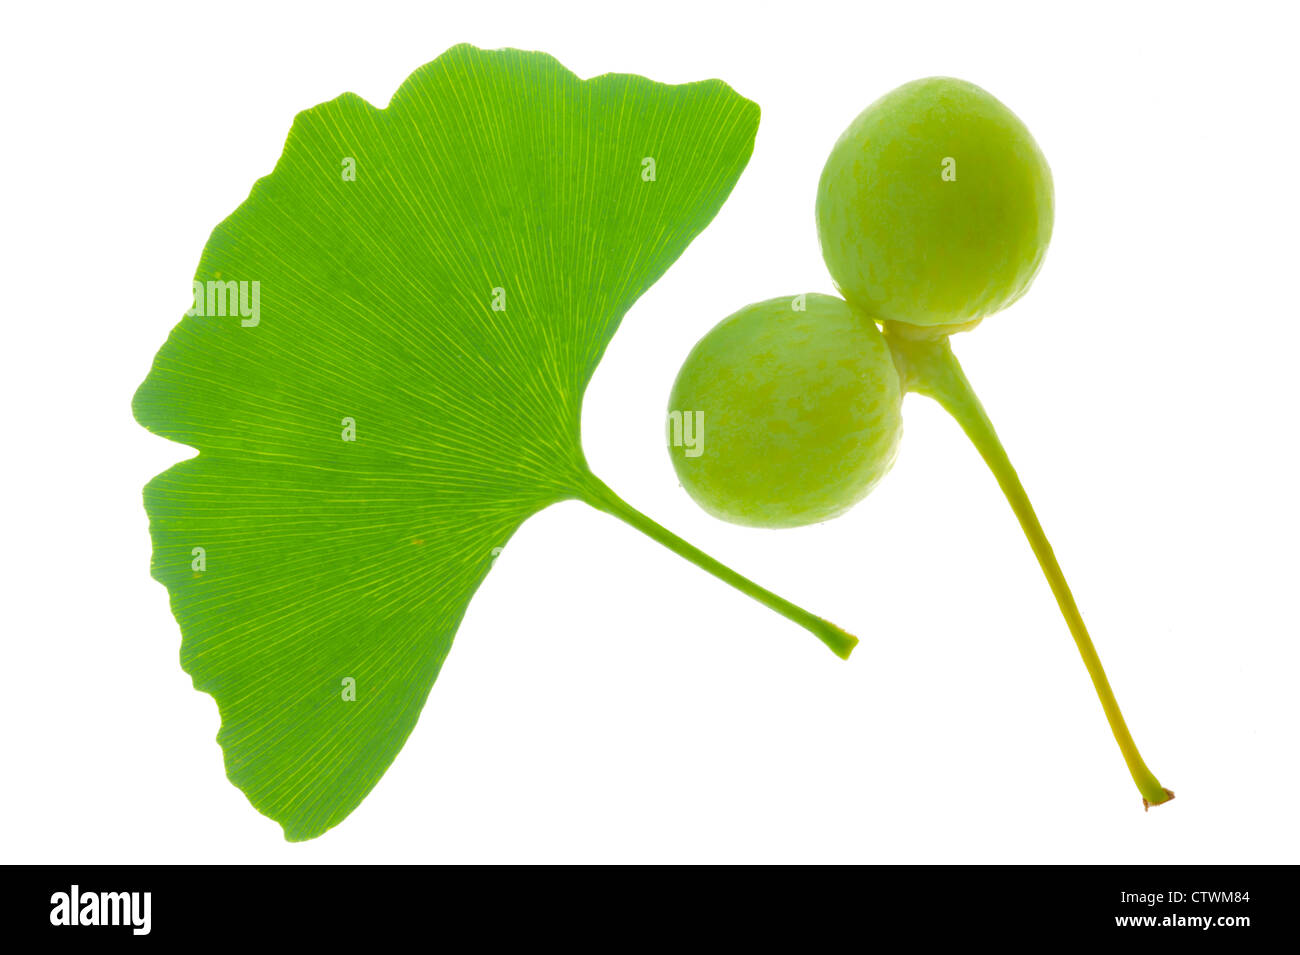 Ginkgo leaf and fruits on twig isolated over white background Stock Photo